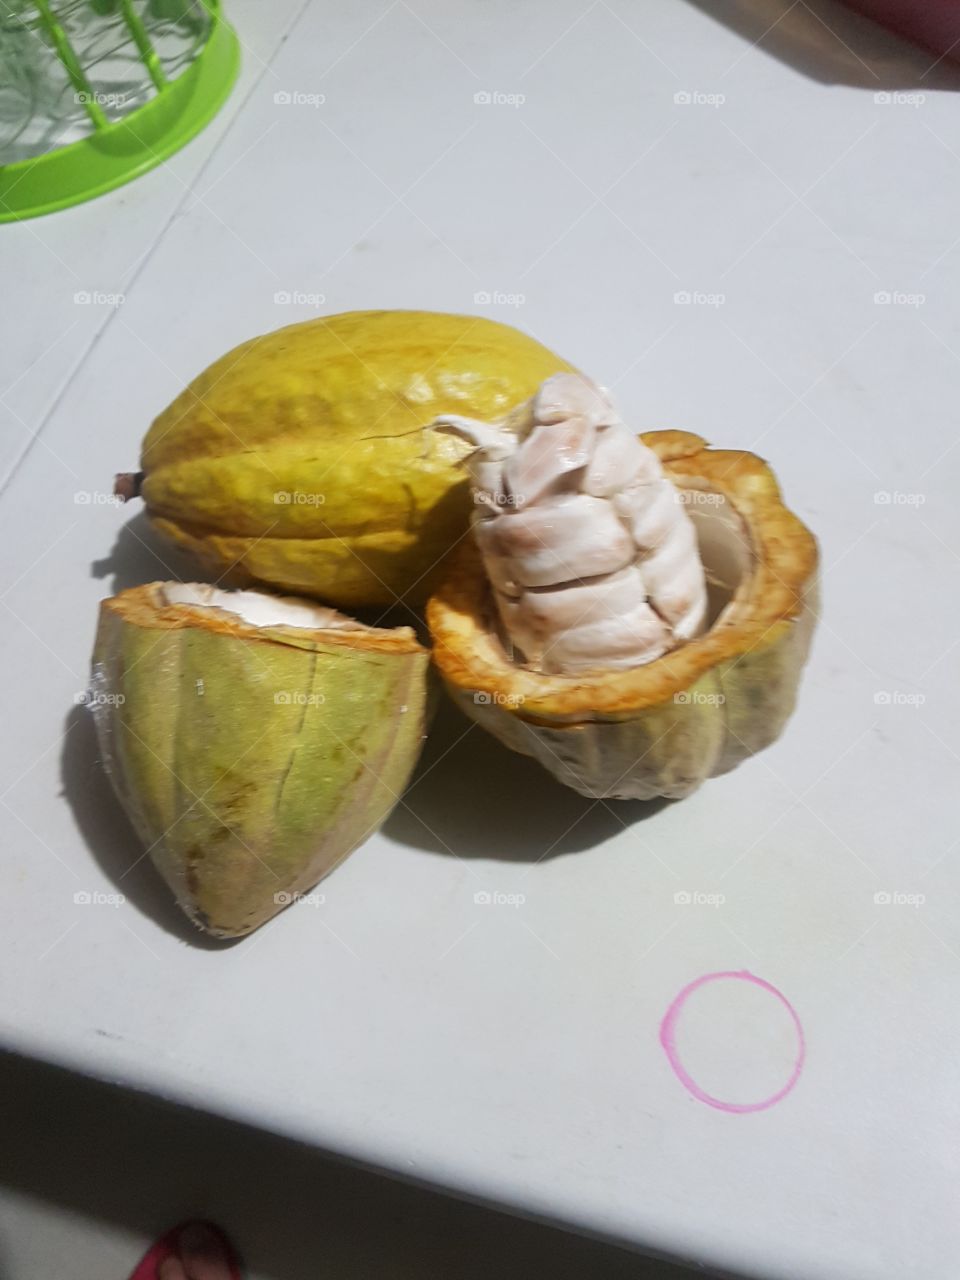 This is a cacao fruit. Its the main source of chocolate. The taste is yummy. I was thinking before that the pulp is like that of a big almond seed, small seeds similar to santol seeds.